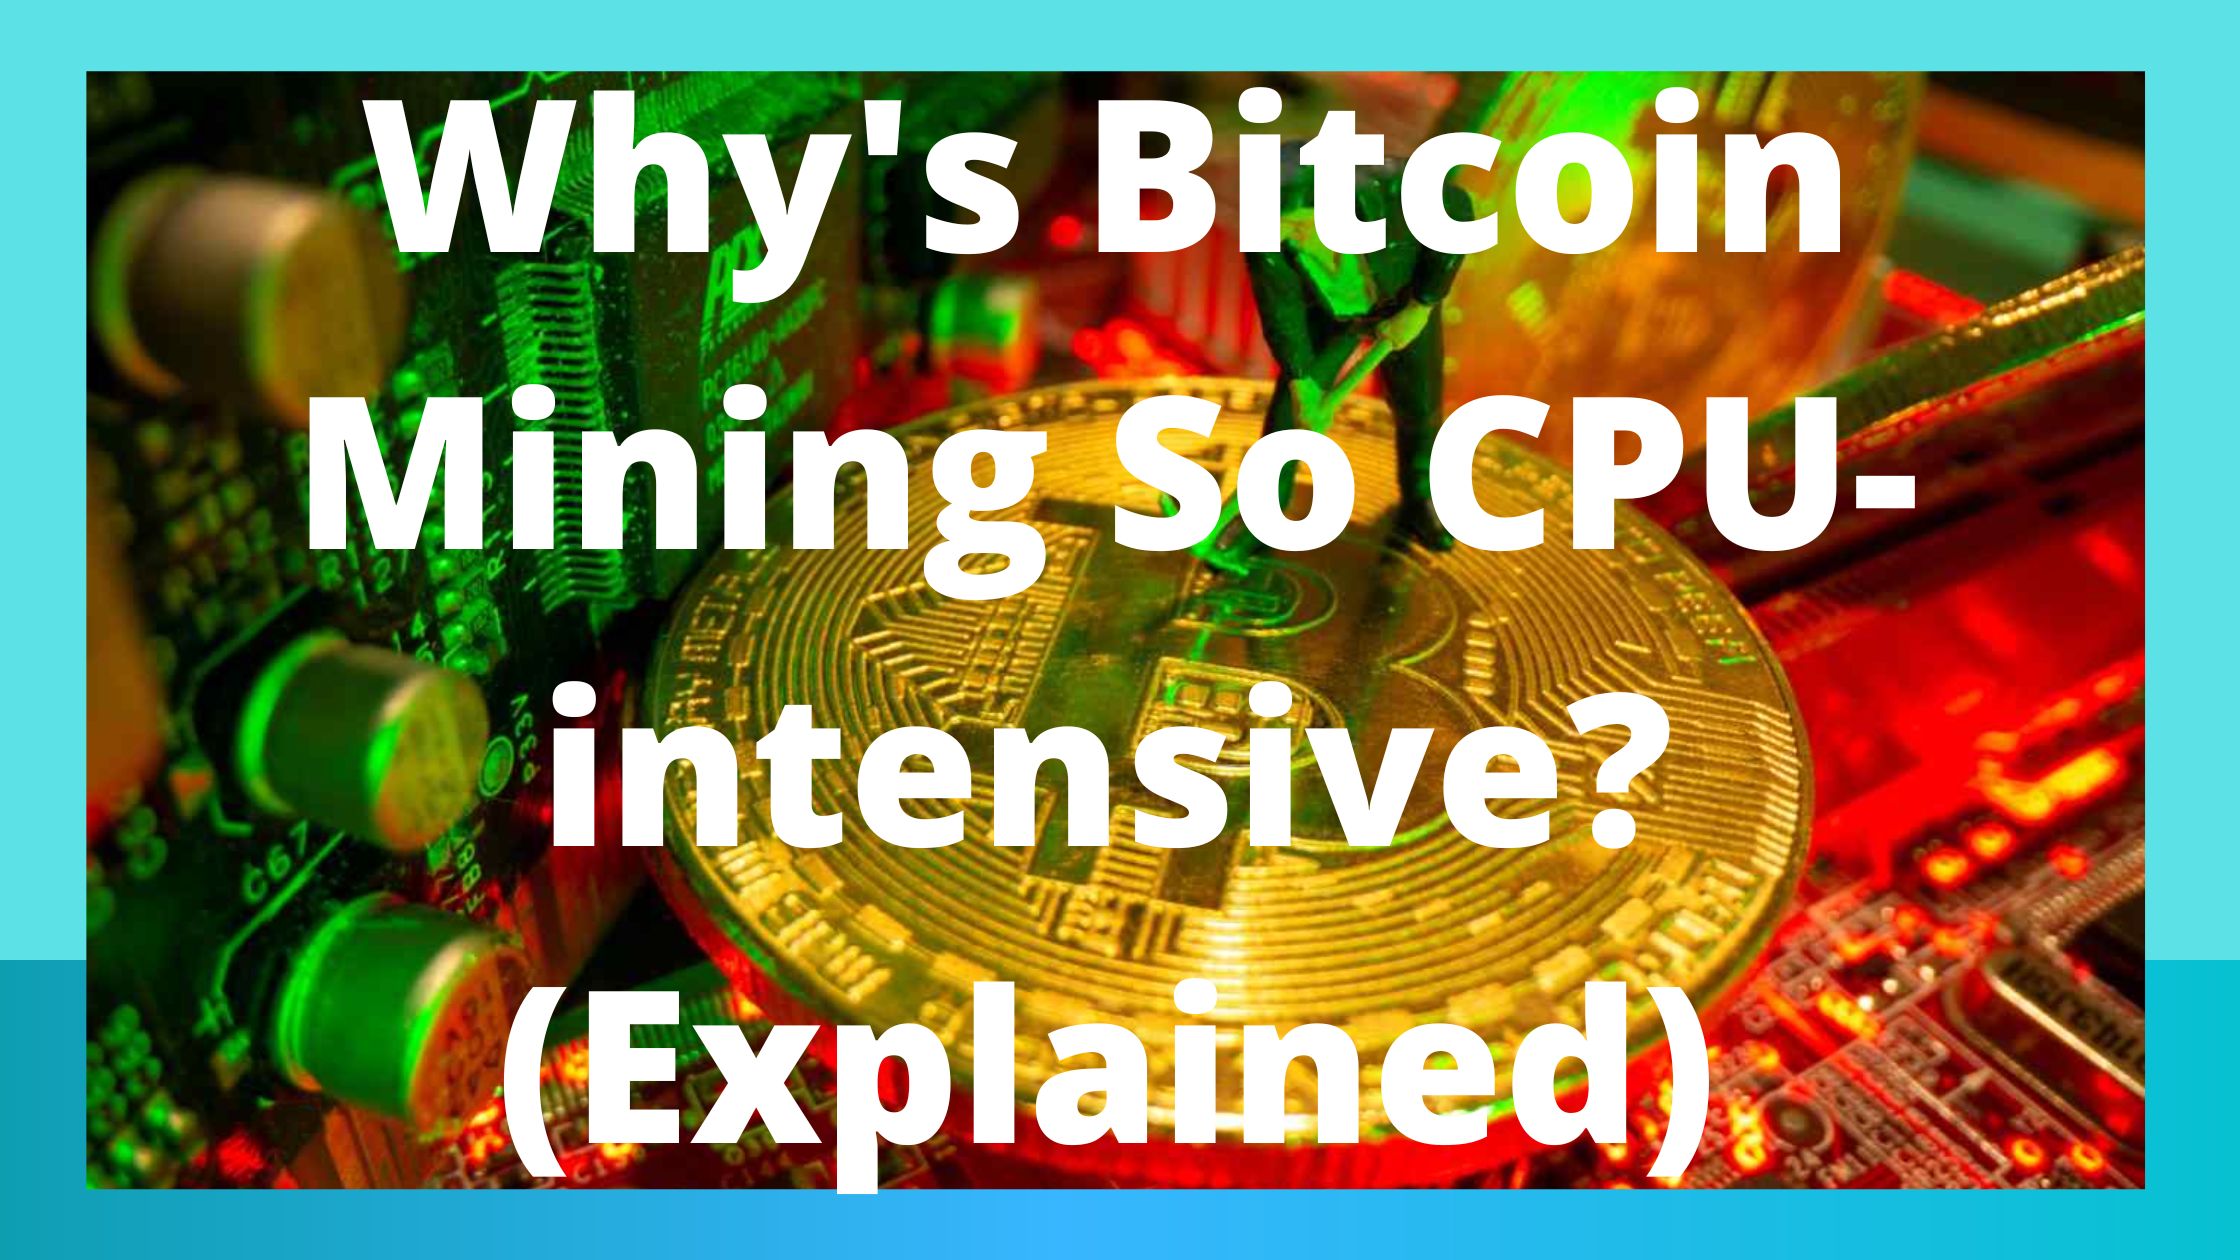 Why's Bitcoin Mining So CPU-intensive? (Explained)